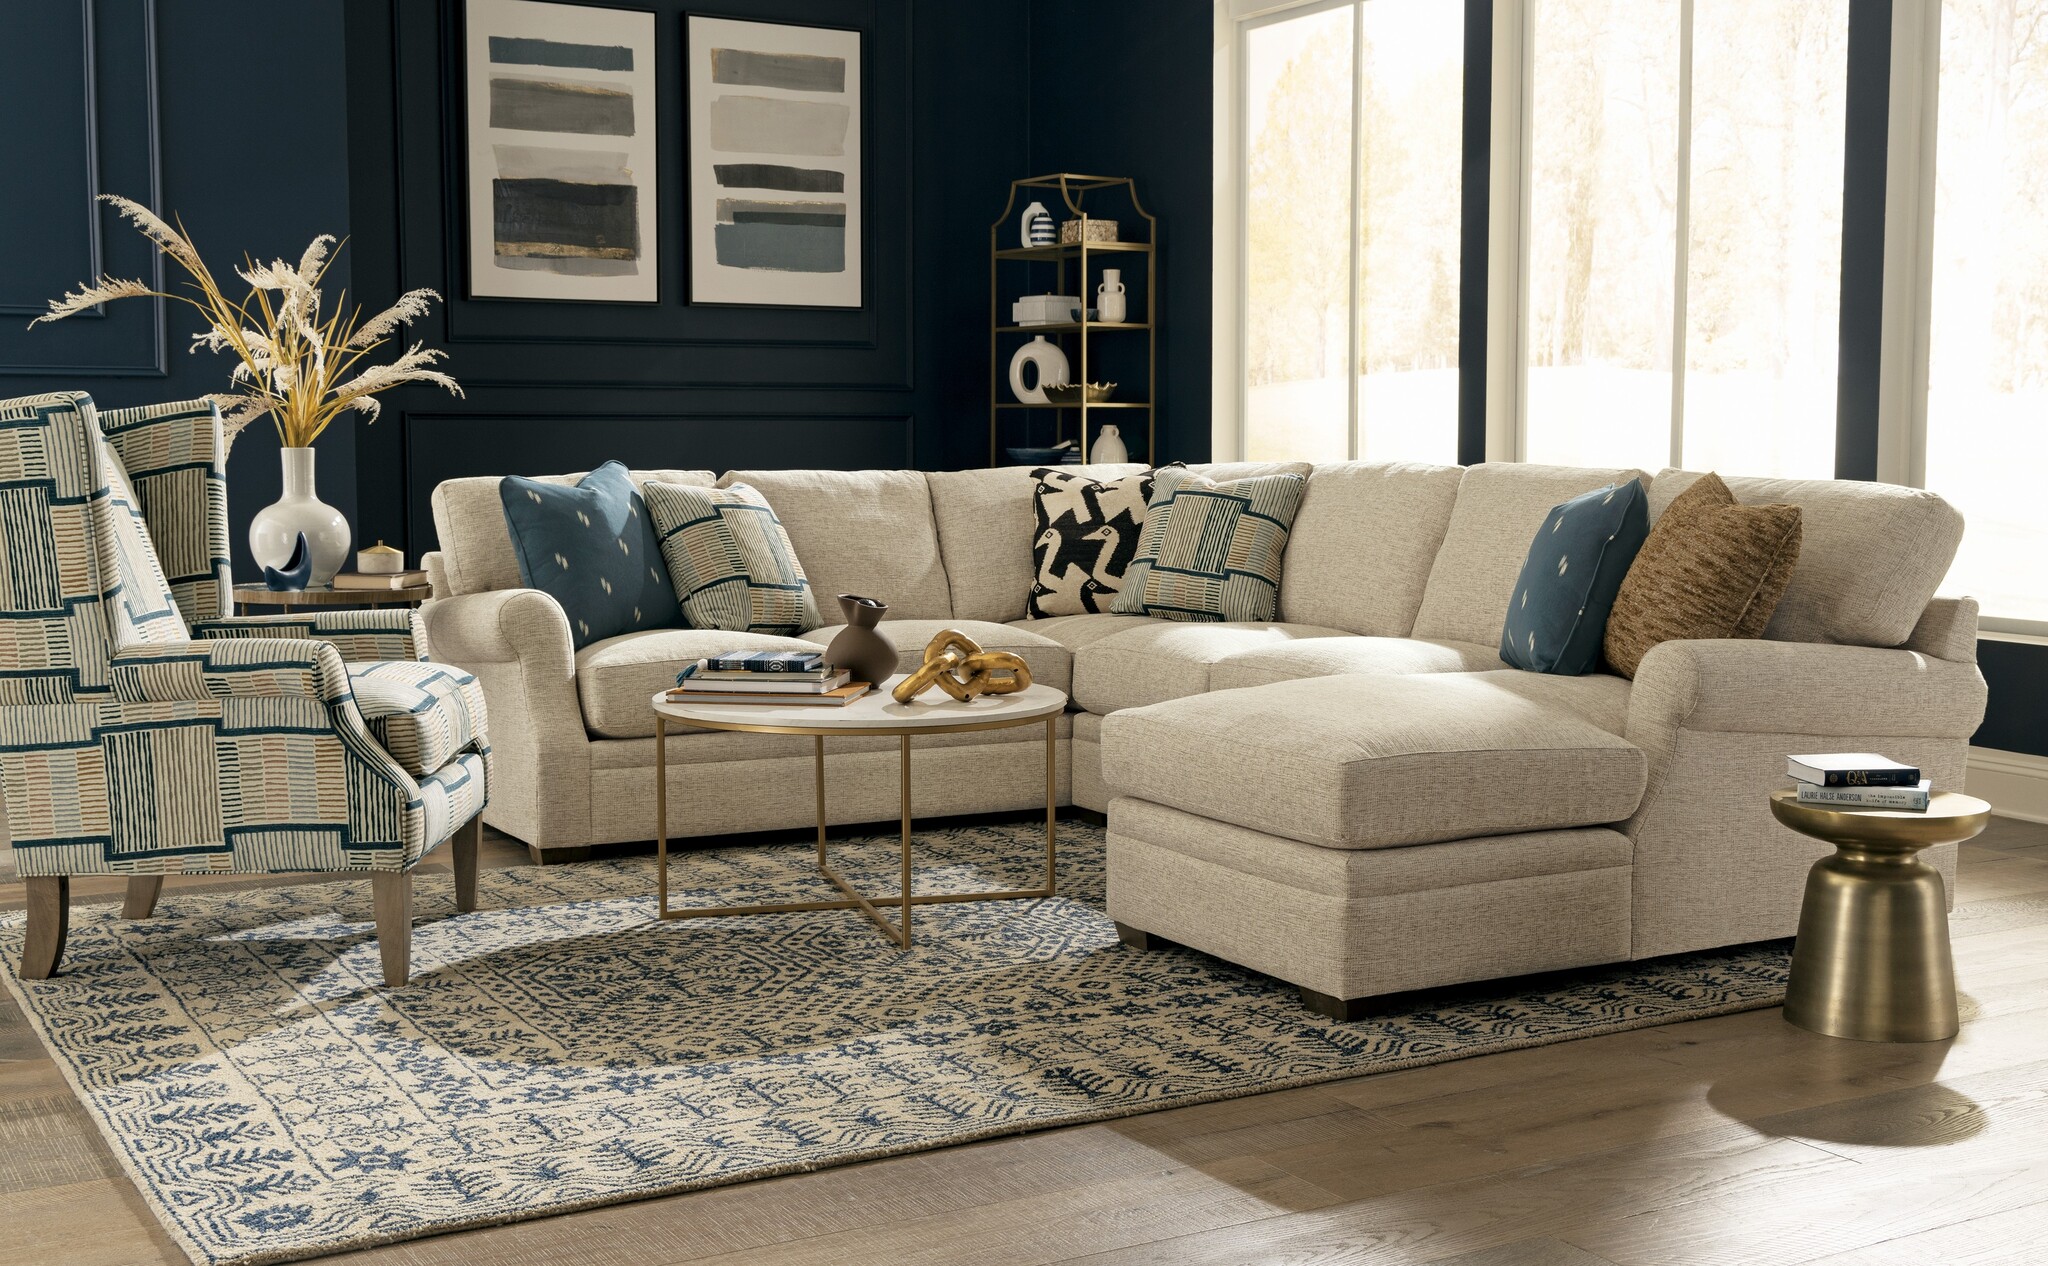 Craftmaster Furniture 7236 Sectional